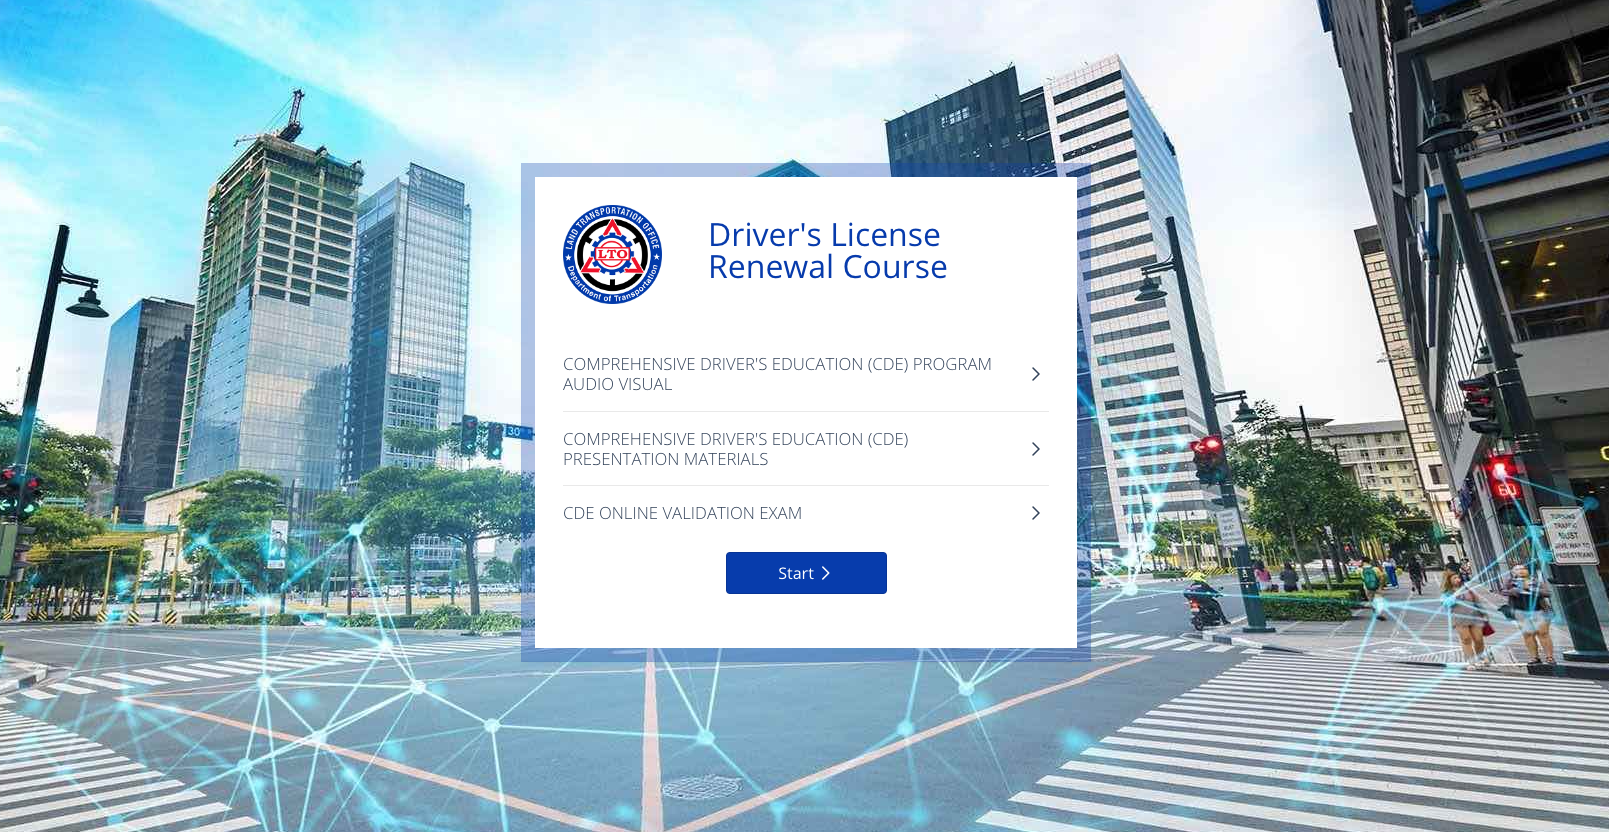 how to use ltms portal - how to access driver's license renewal course